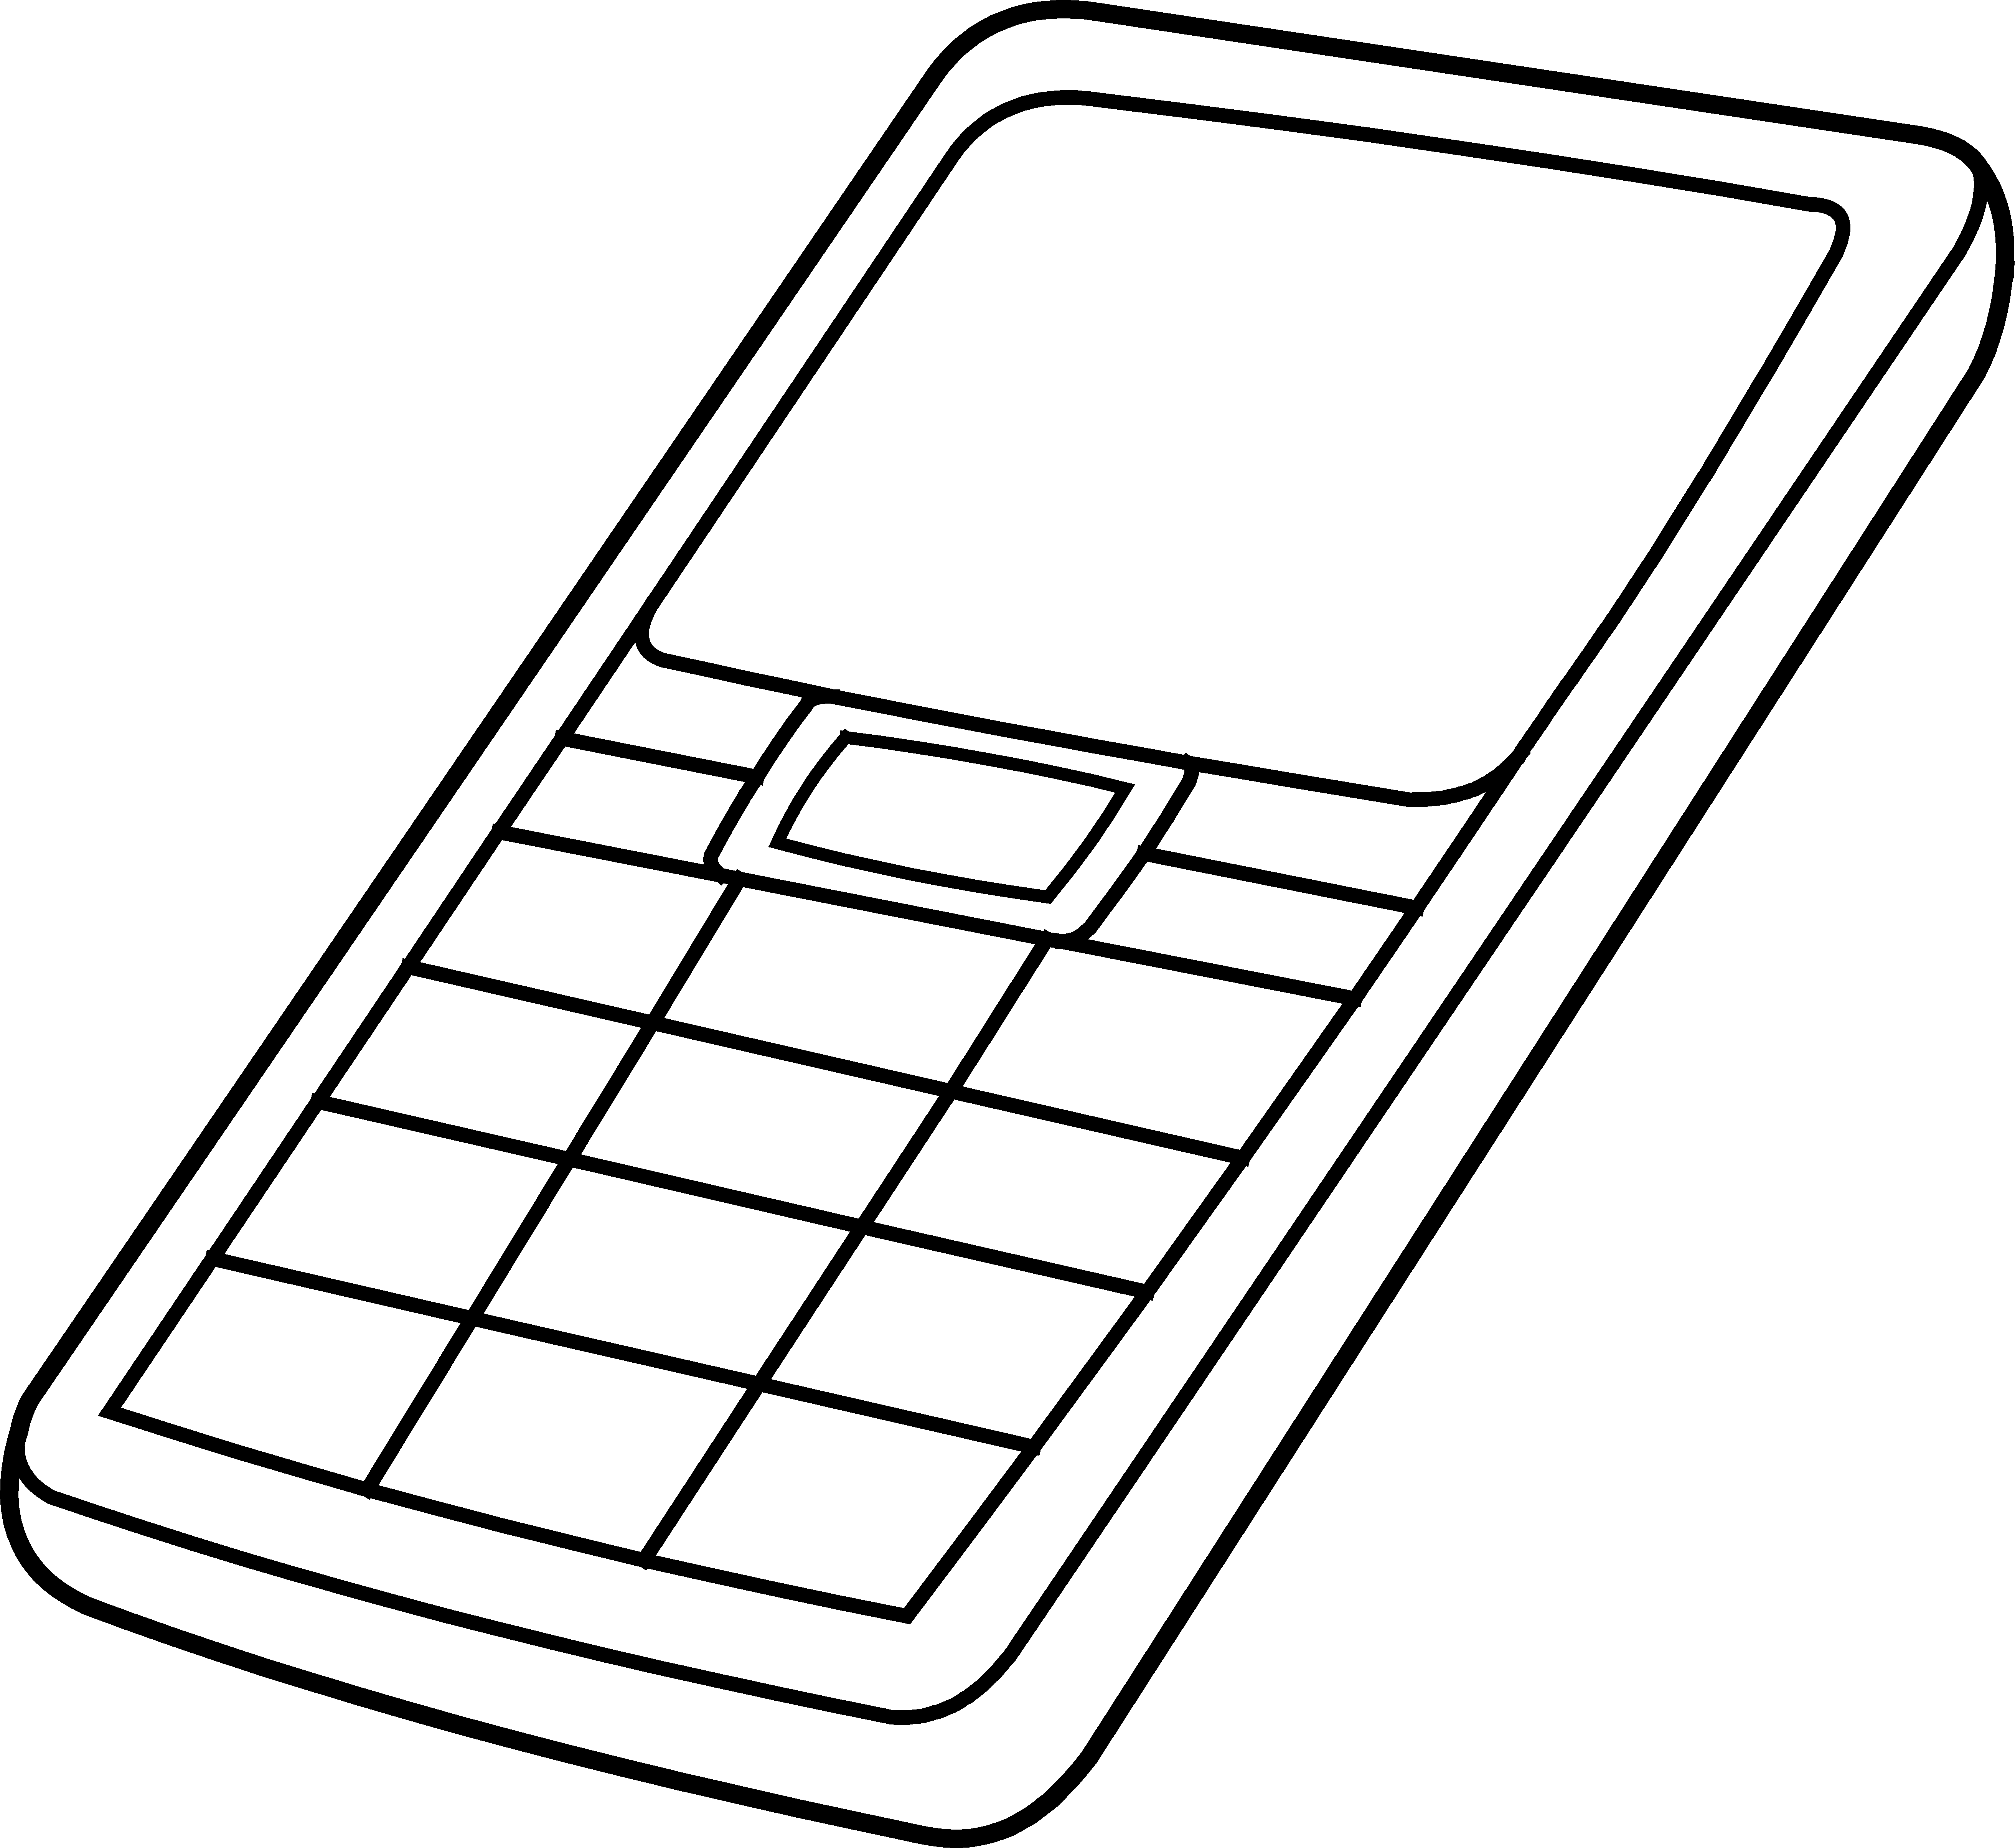 Mobile Phone Clipart Black And White - ClipArt Best